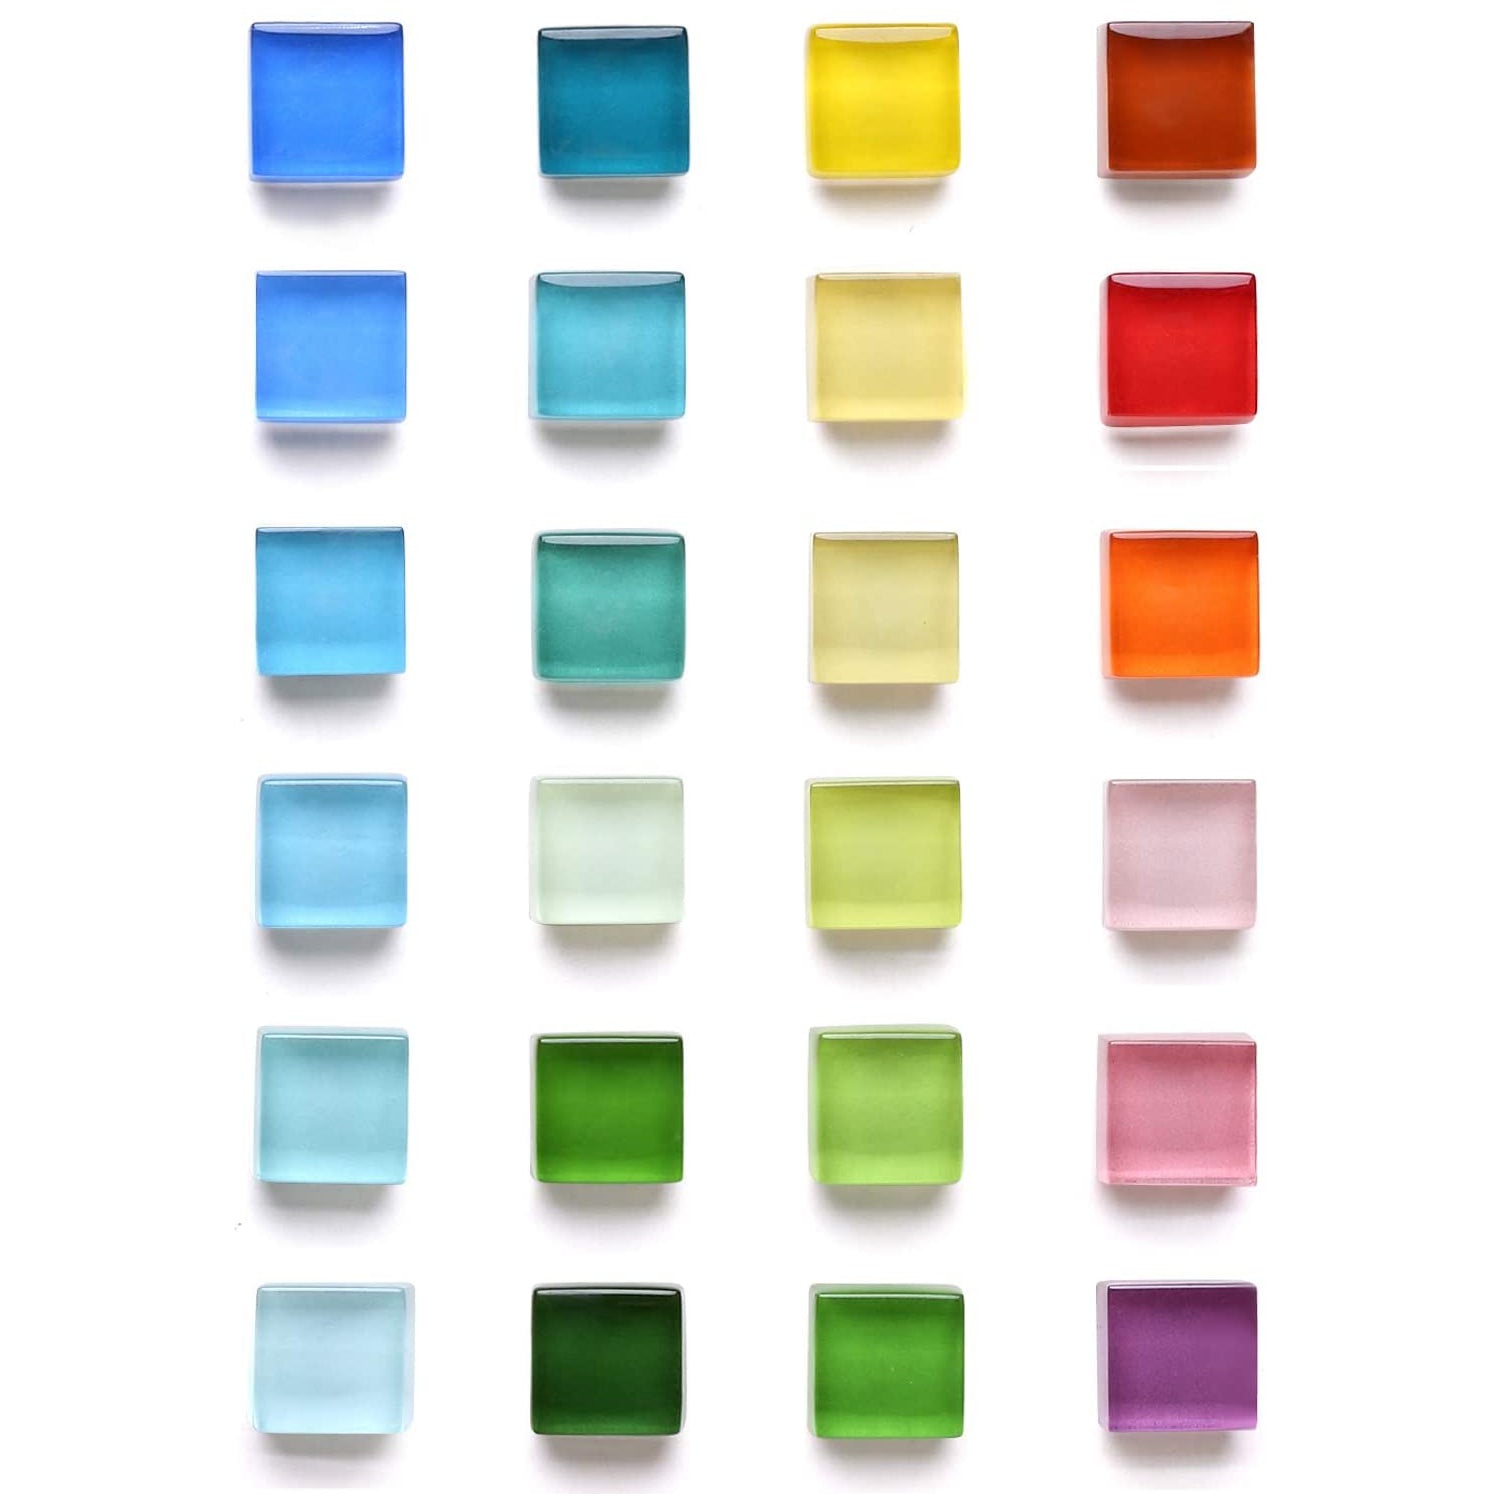 24-Pack Colorful Glass Fridge Magnets (24 Colors)